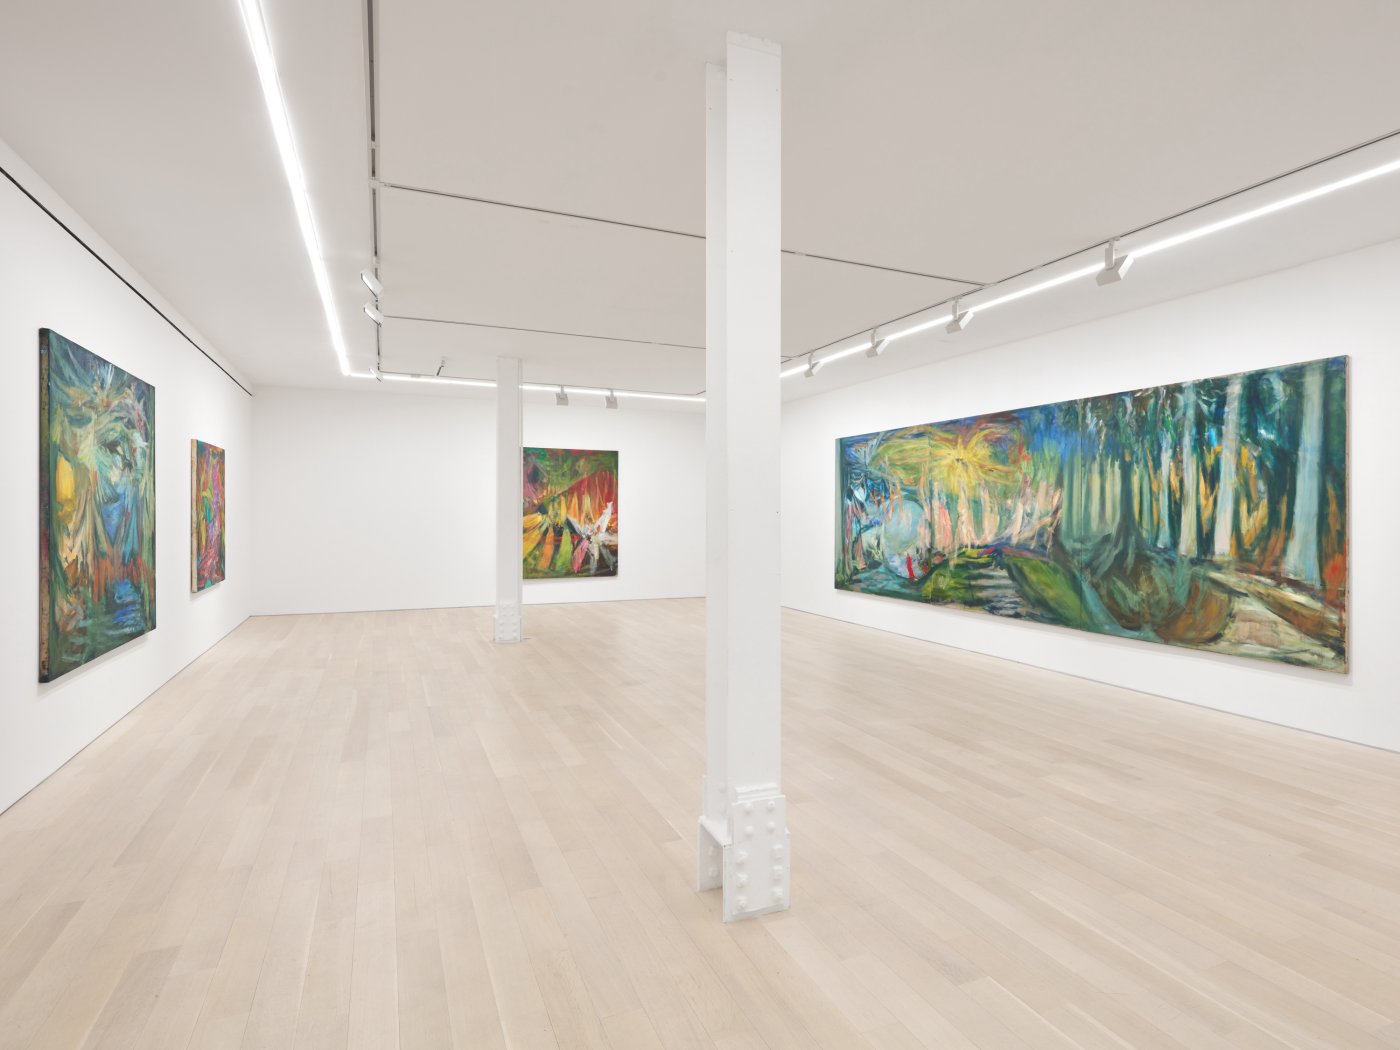 Installation image for Sarah Cunningham: In Its Daybreak, Rising, at Almine Rech